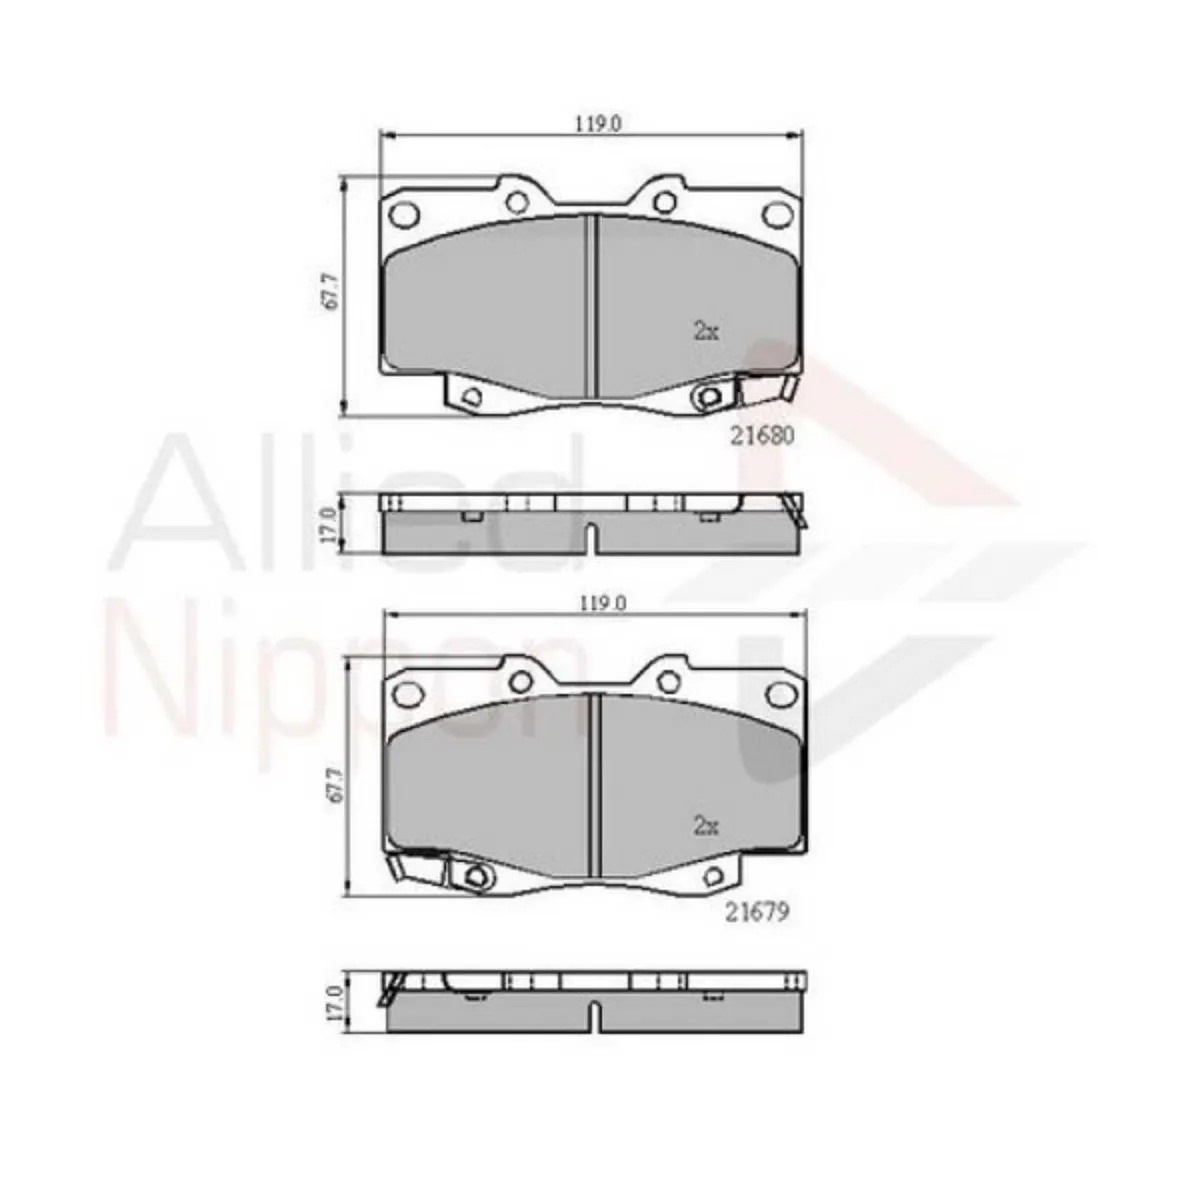 Toyota Hilux 2005-2009 Front Brake Pads - Image 1